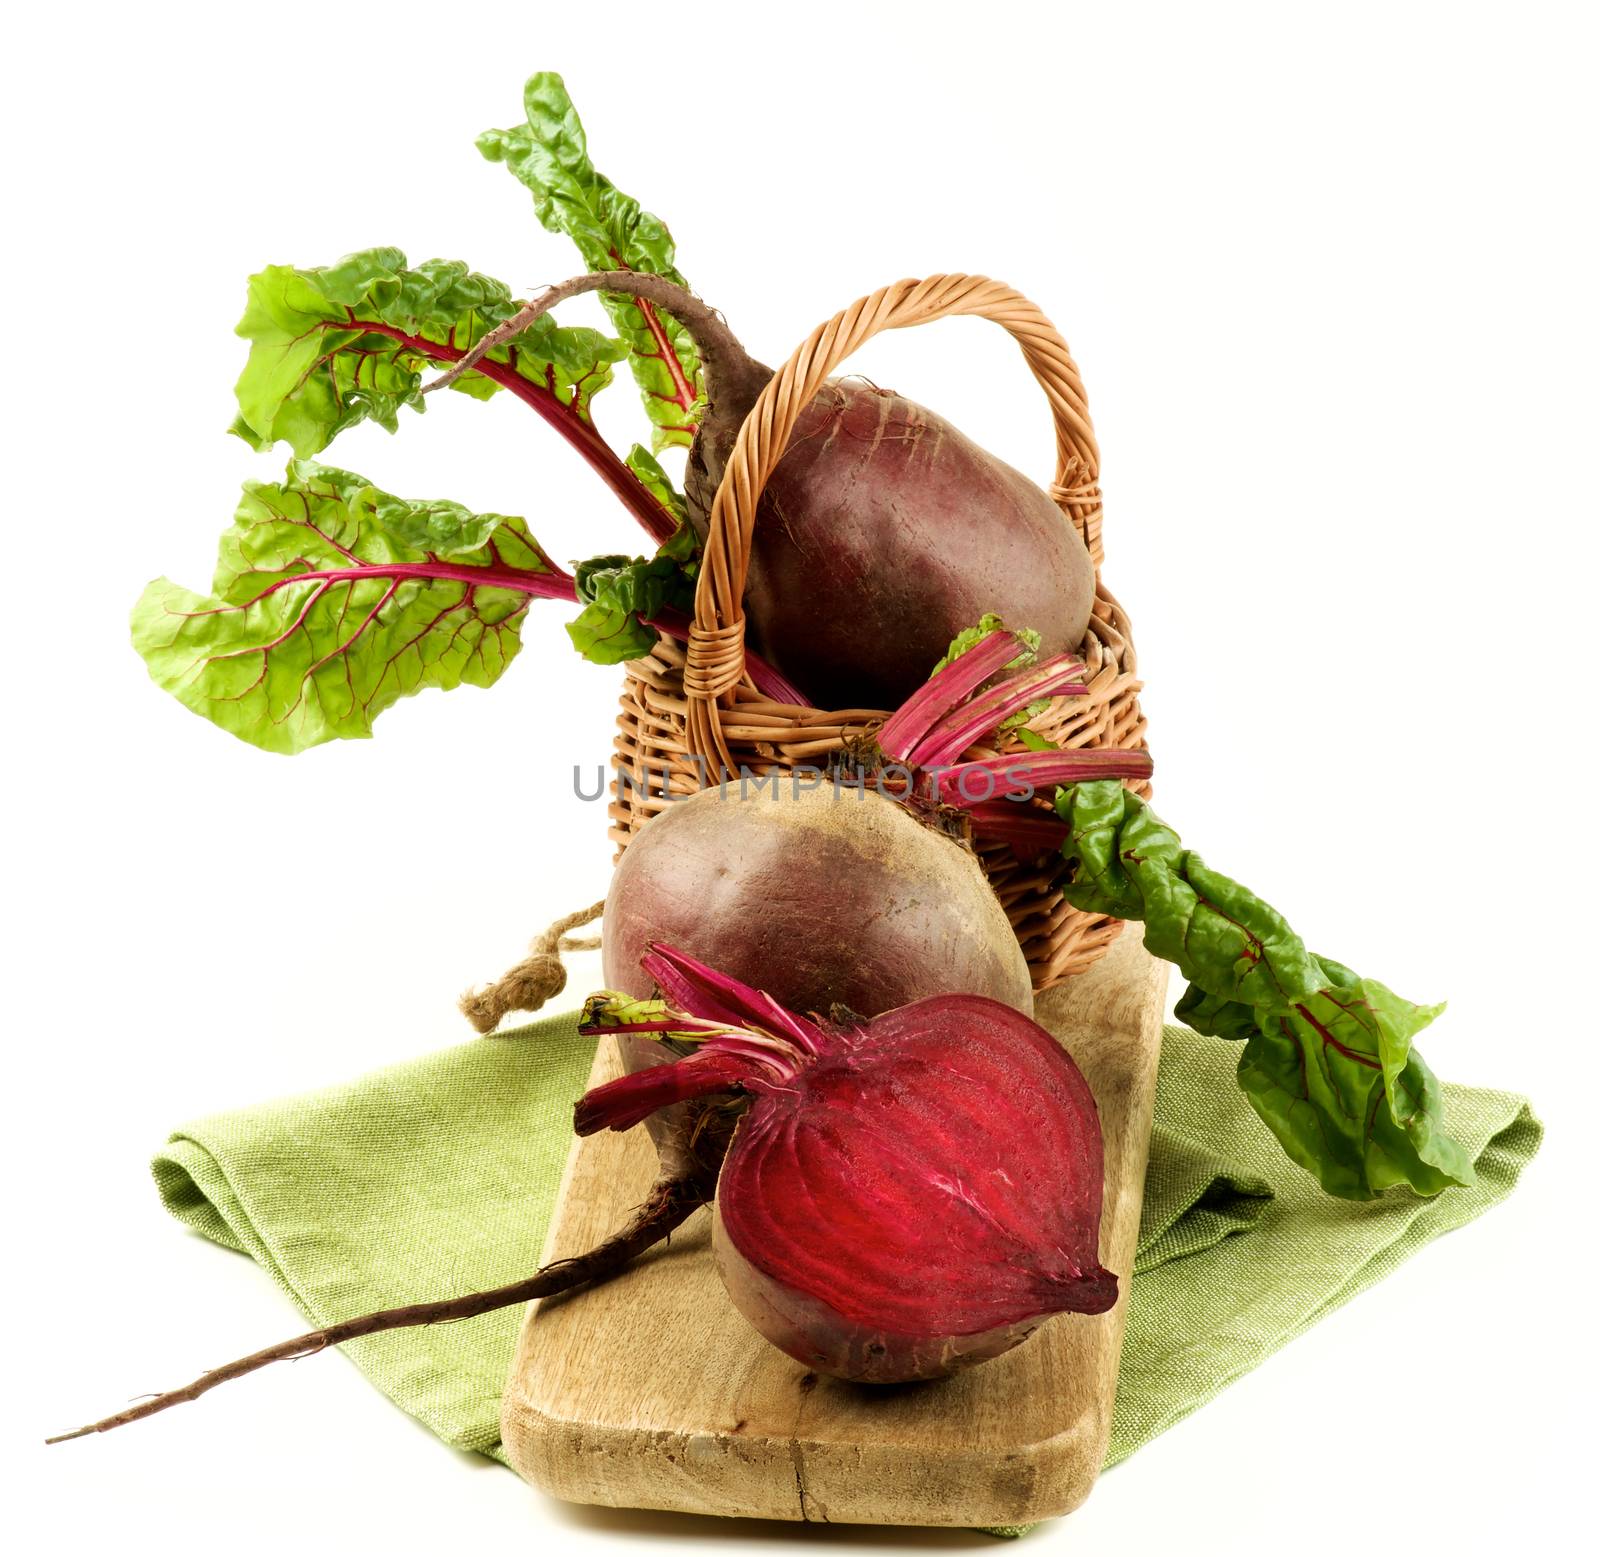 Fresh Raw Organic Beet Roots with Green Beet Tops Full Body and Half in Wicker Basket on Wooden Board and Napkin isolated on White background